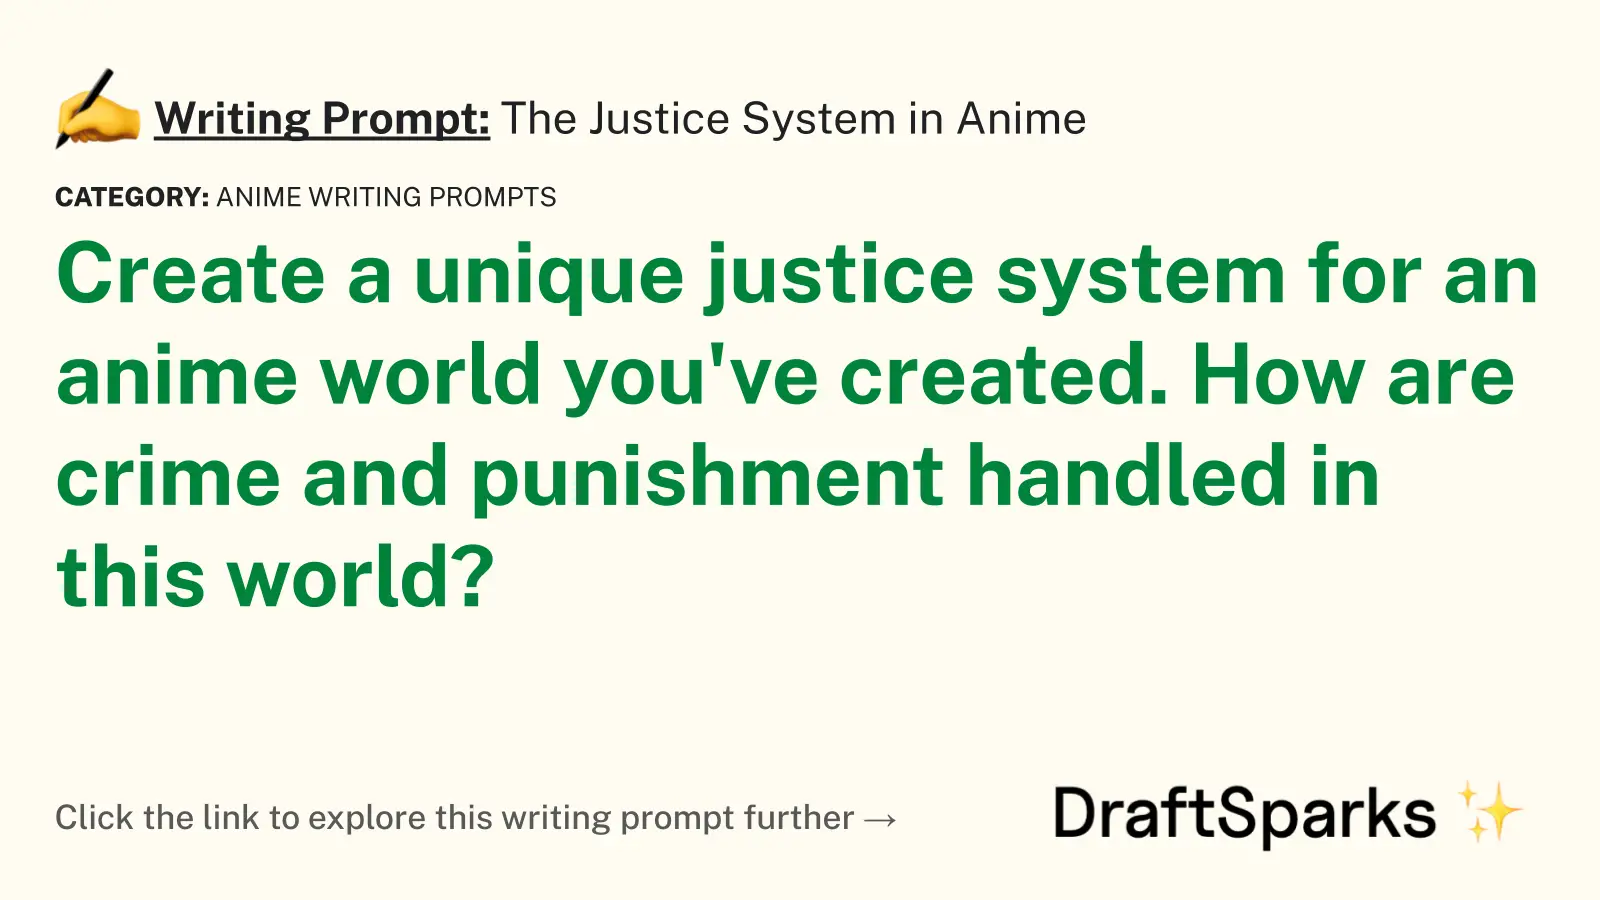 The Justice System in Anime